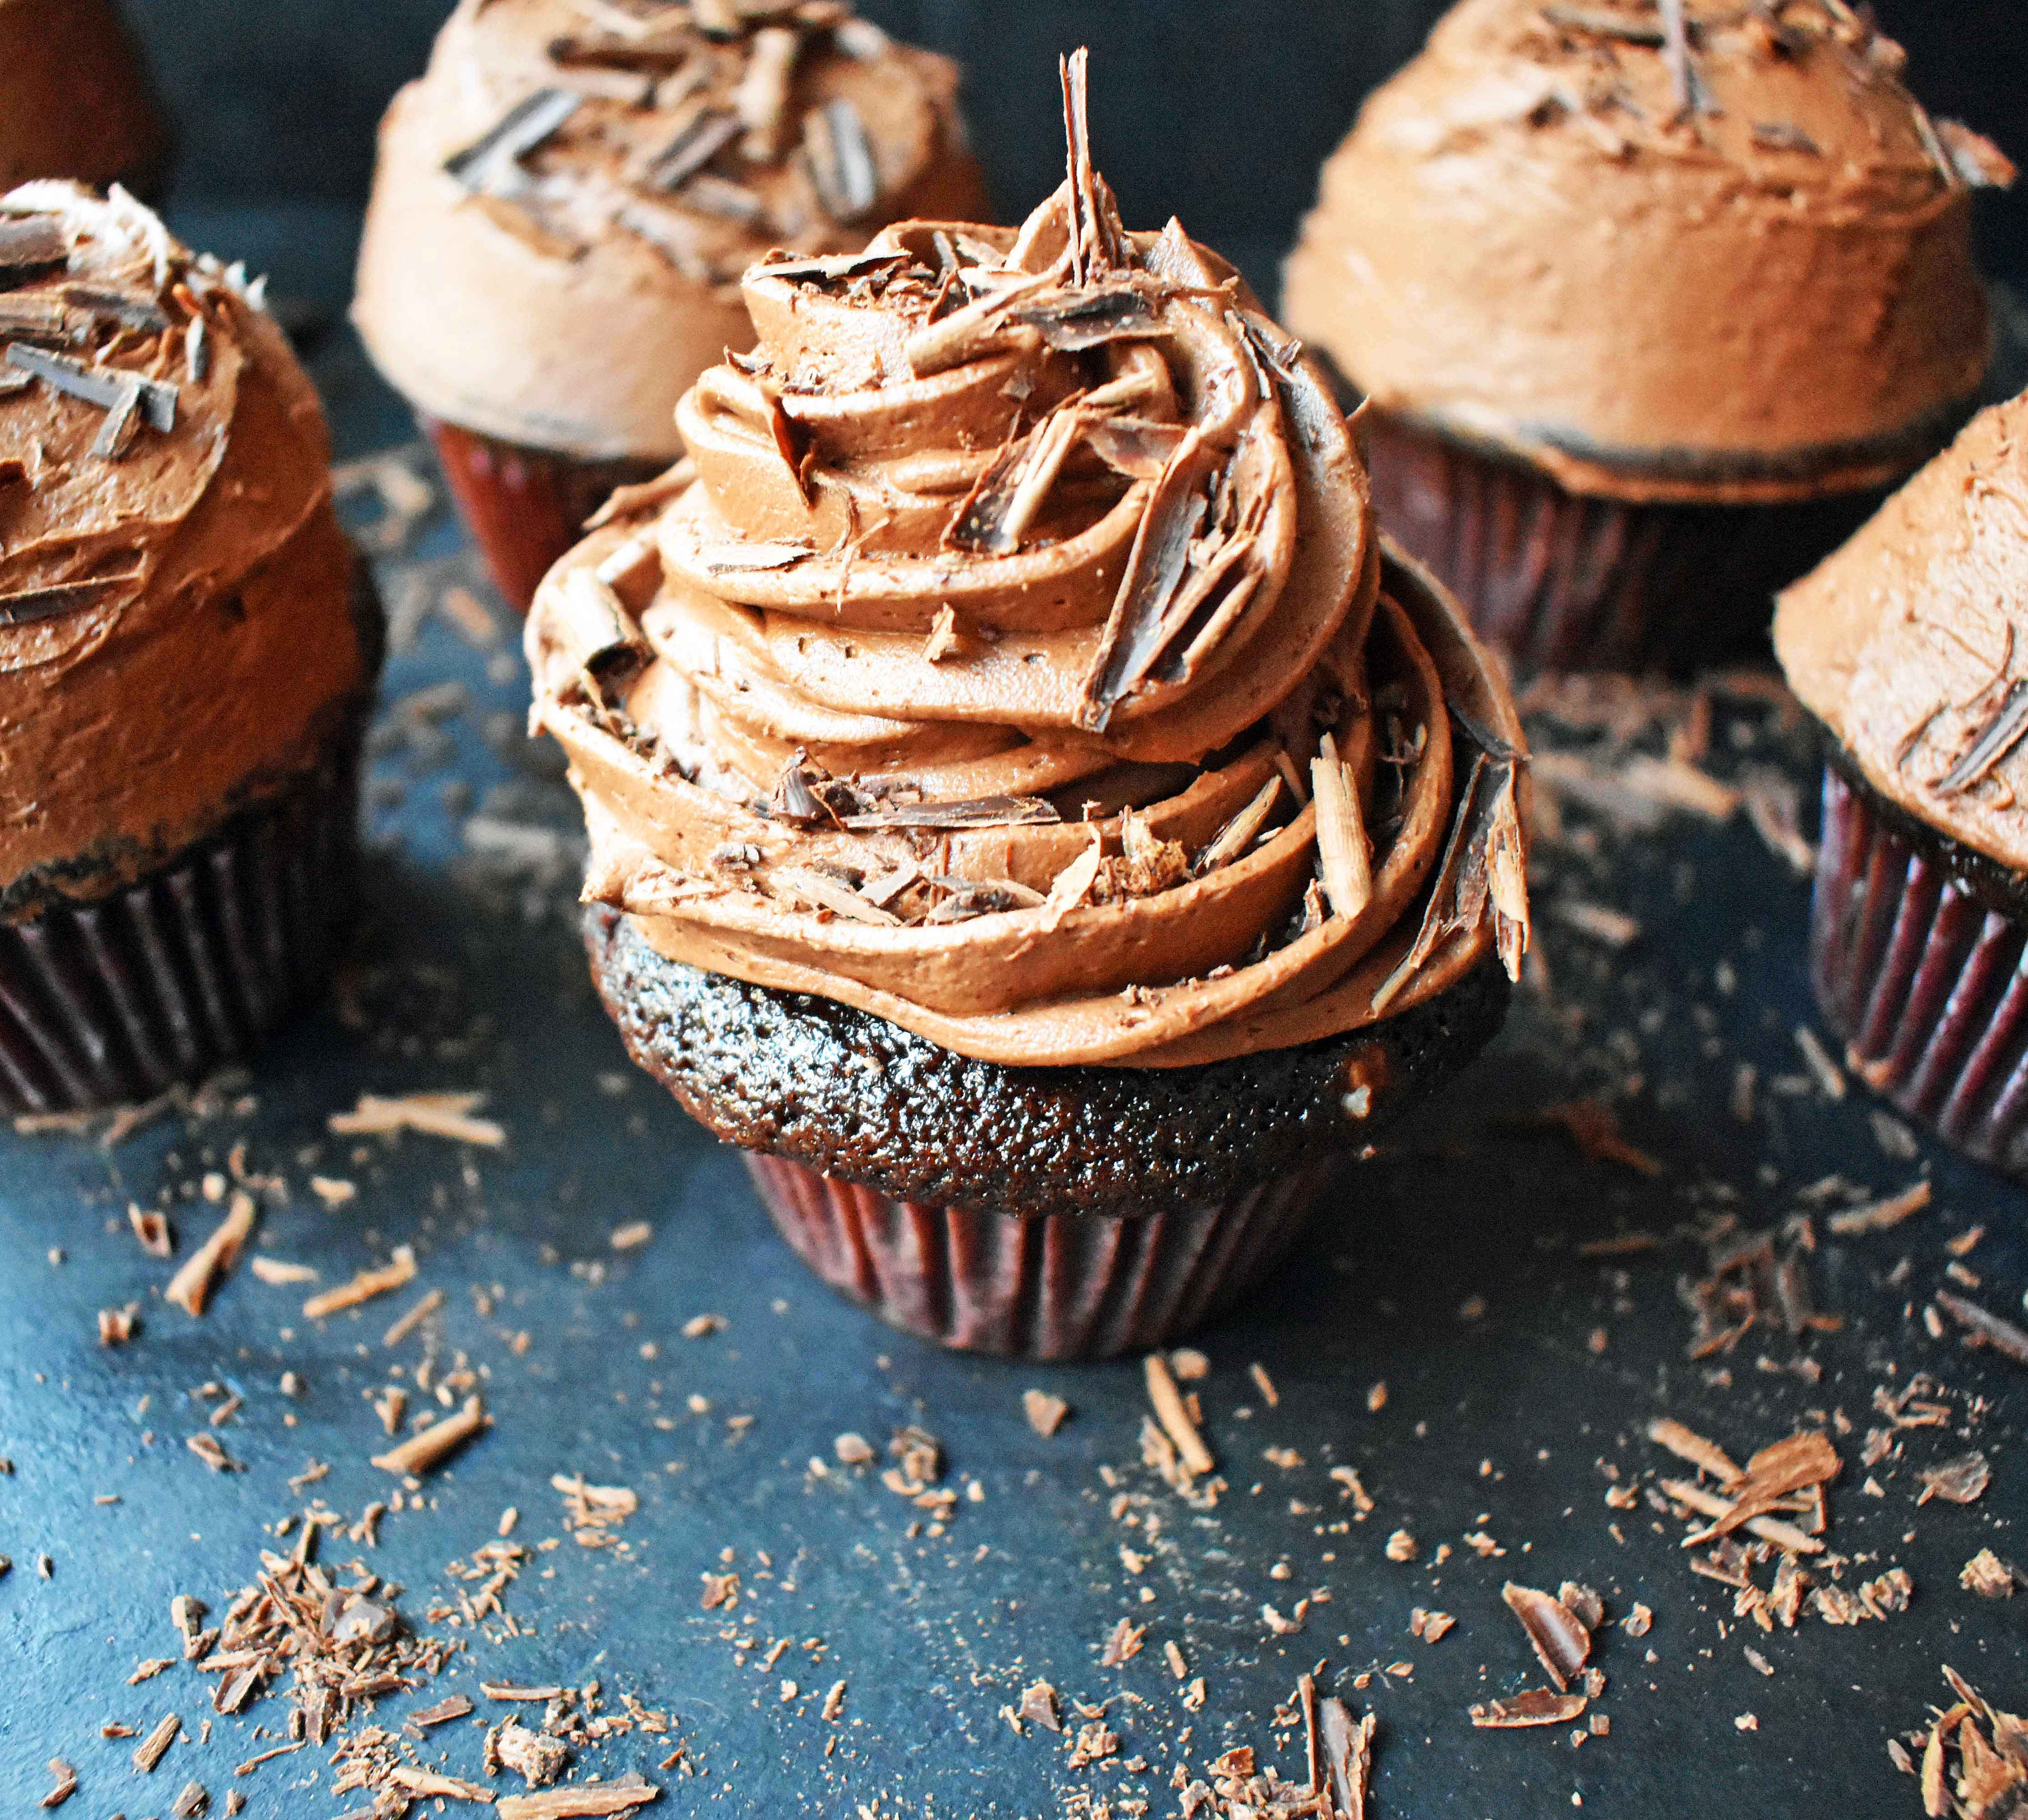 Chocolate Bombshell Birthday Cupcakes. Rich, tender, and fluffy chocolate cake topped with homemade perfect chocolate buttercream frosting. A match made in heaven! These are the ultimate chocolate cupcake. www.modernhoney.com